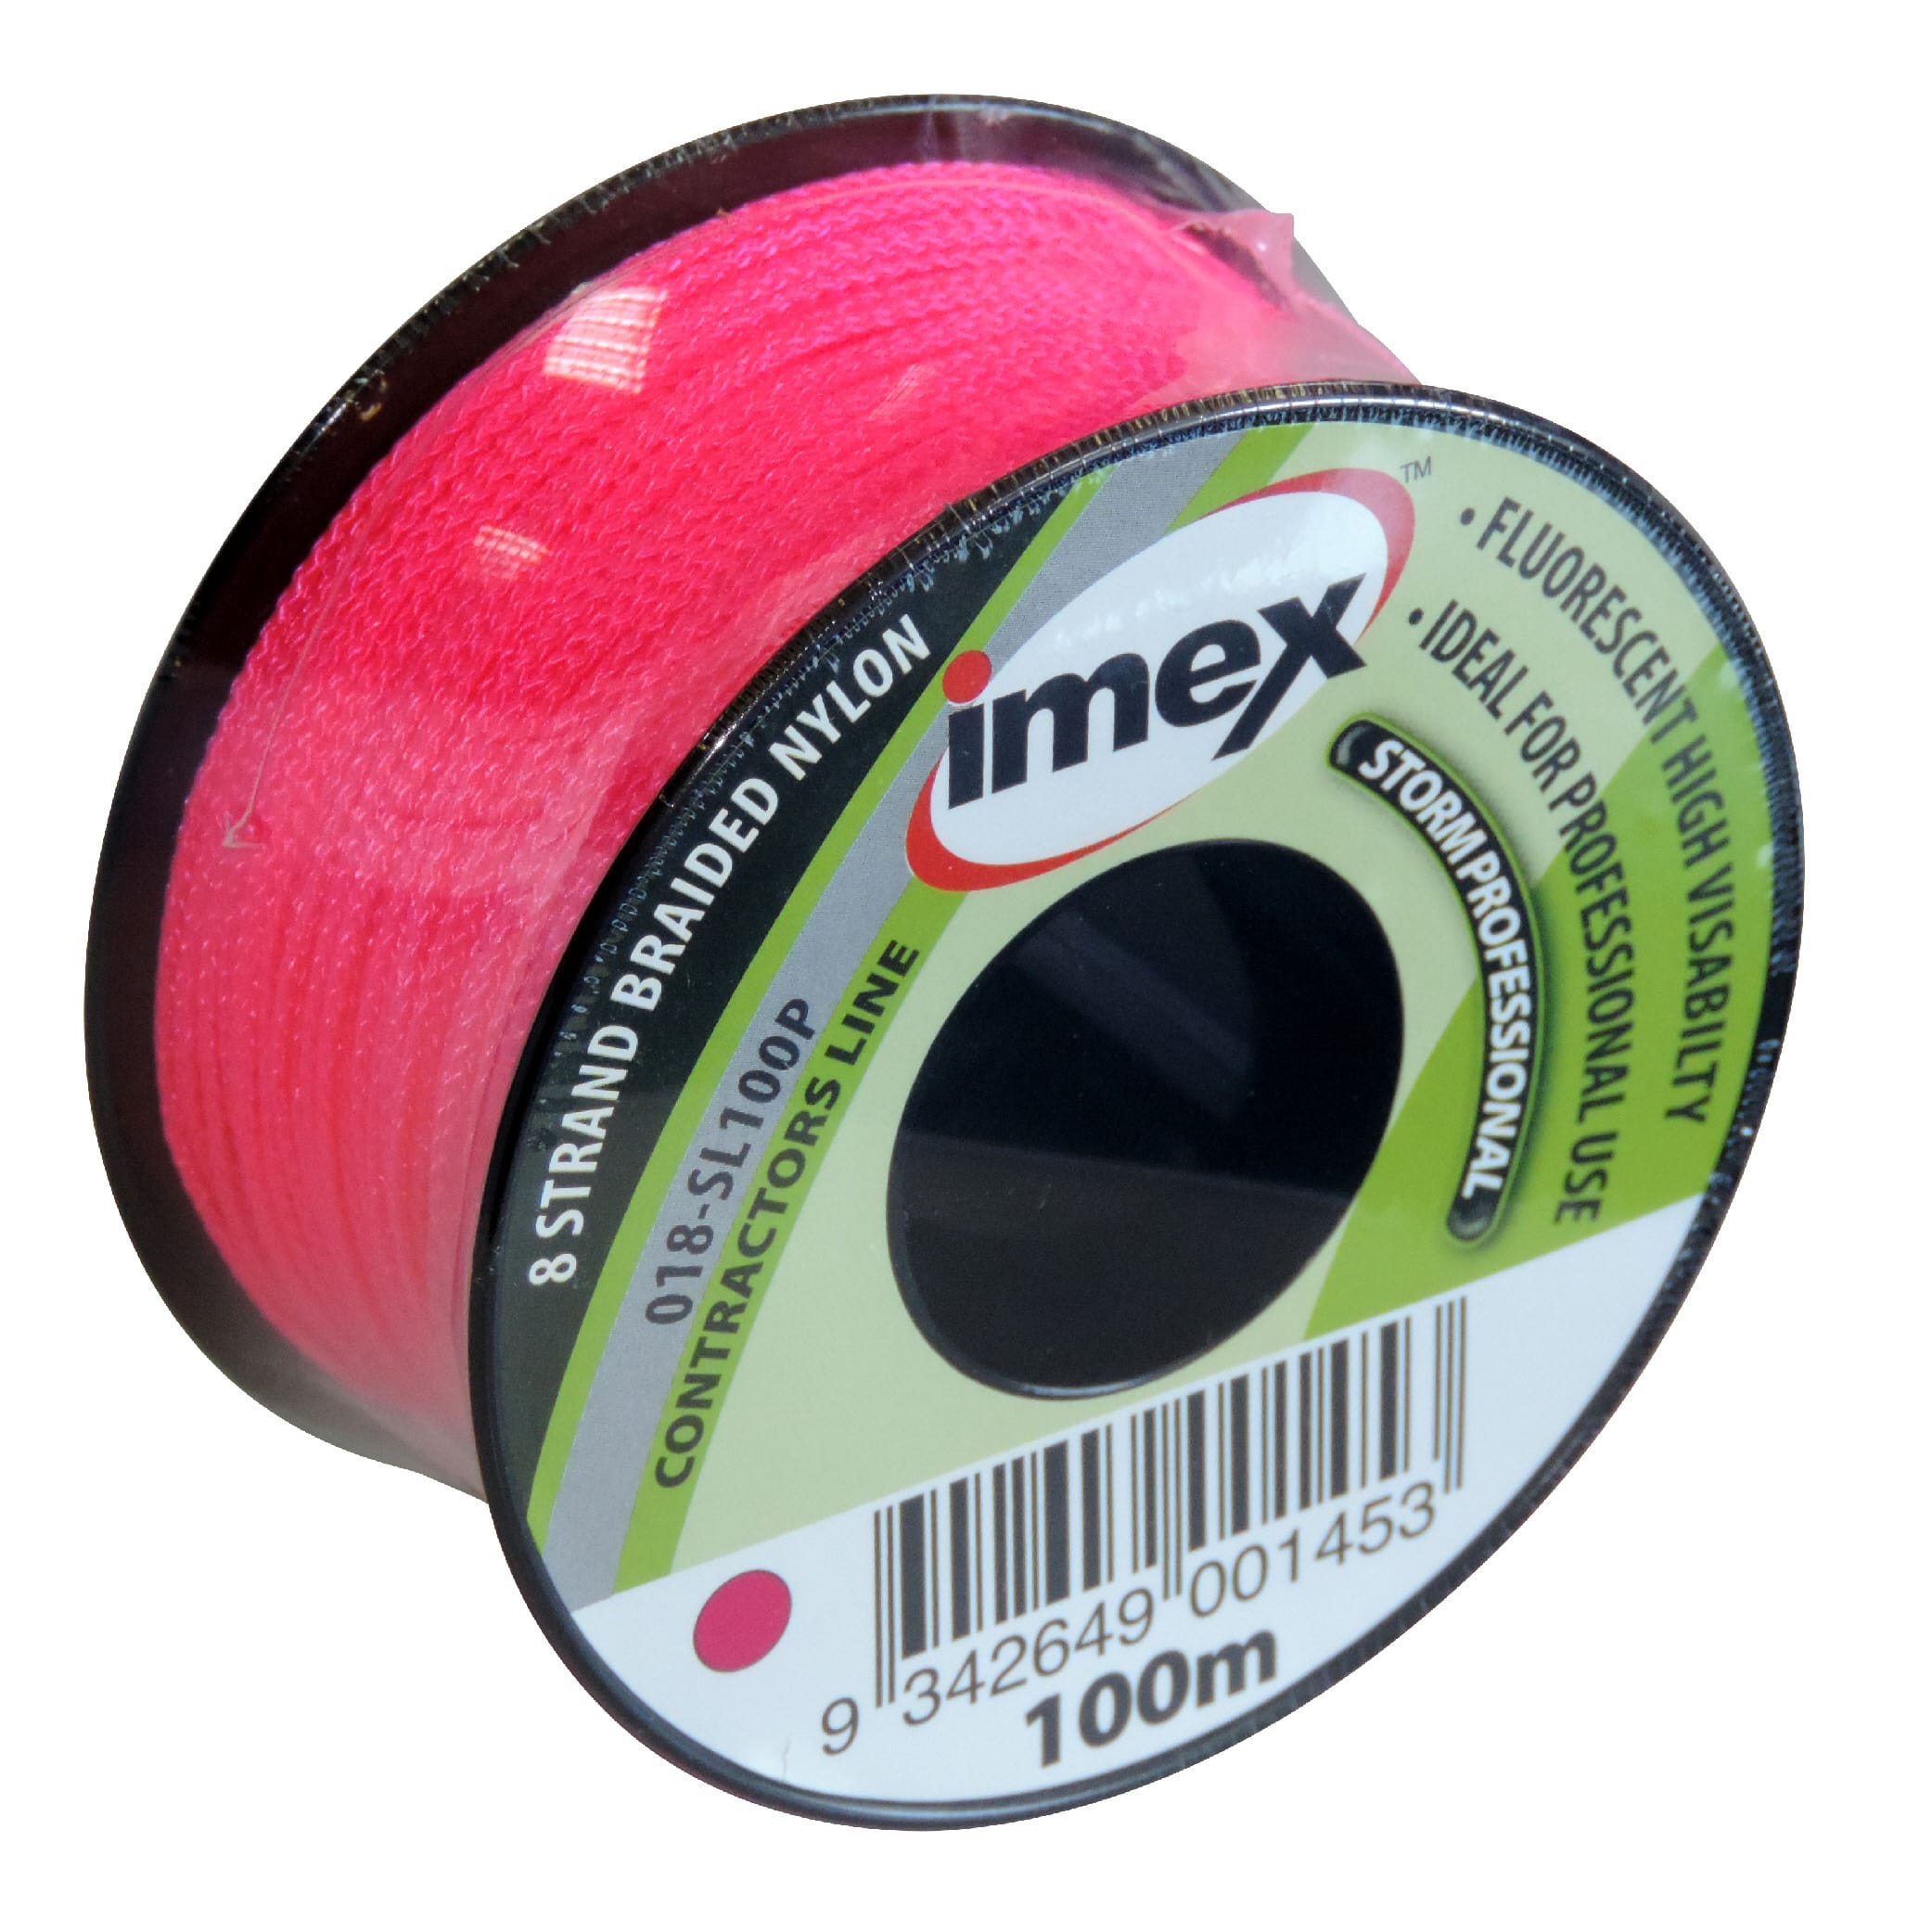 STRINGLINER COMPANY 25162 Stringliner PRO Braided FL. Pink 250', 250 Foot  (Pack of 1), Multi - Twine 